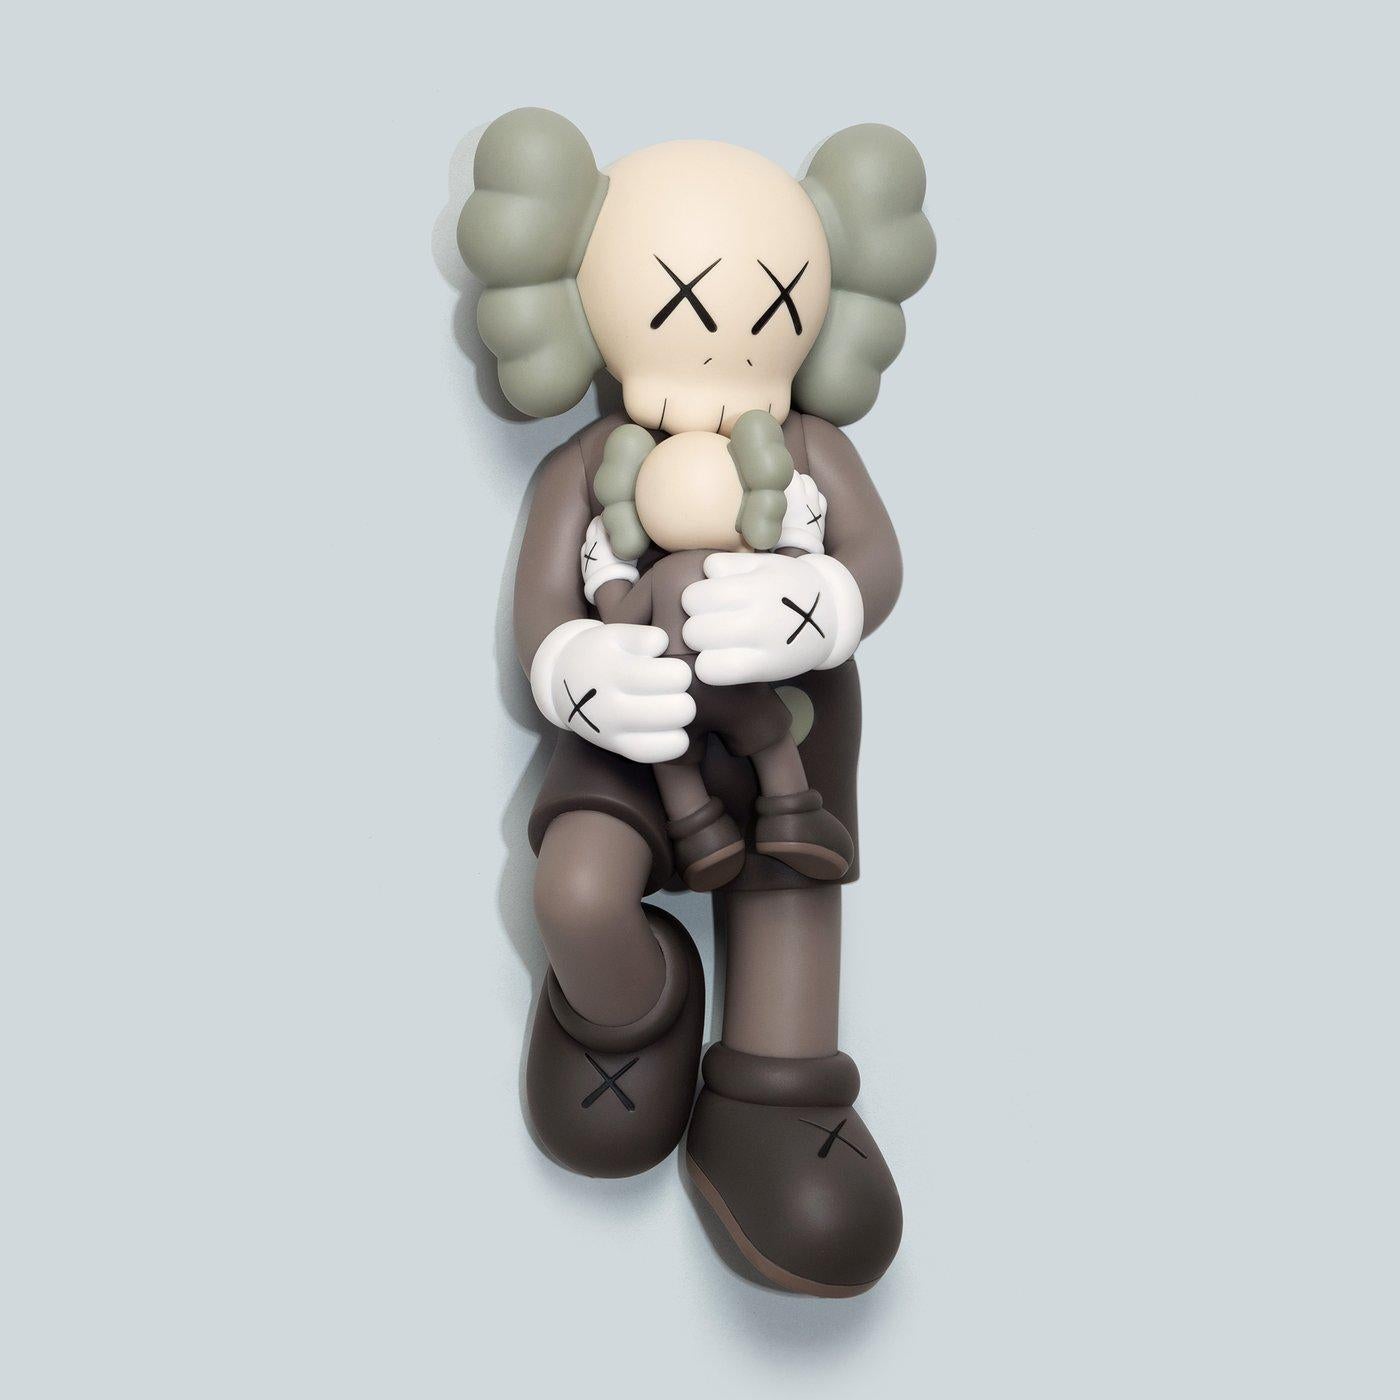 KAWS Brown Holiday Companion (KAWS Singapore): 
This standout KAWS art toy features KAWS' signature character COMPANION in a resting position. Published to commemorate the debut of KAWS’ 42-meter inflatable work of same along Singapore's Marina Bay